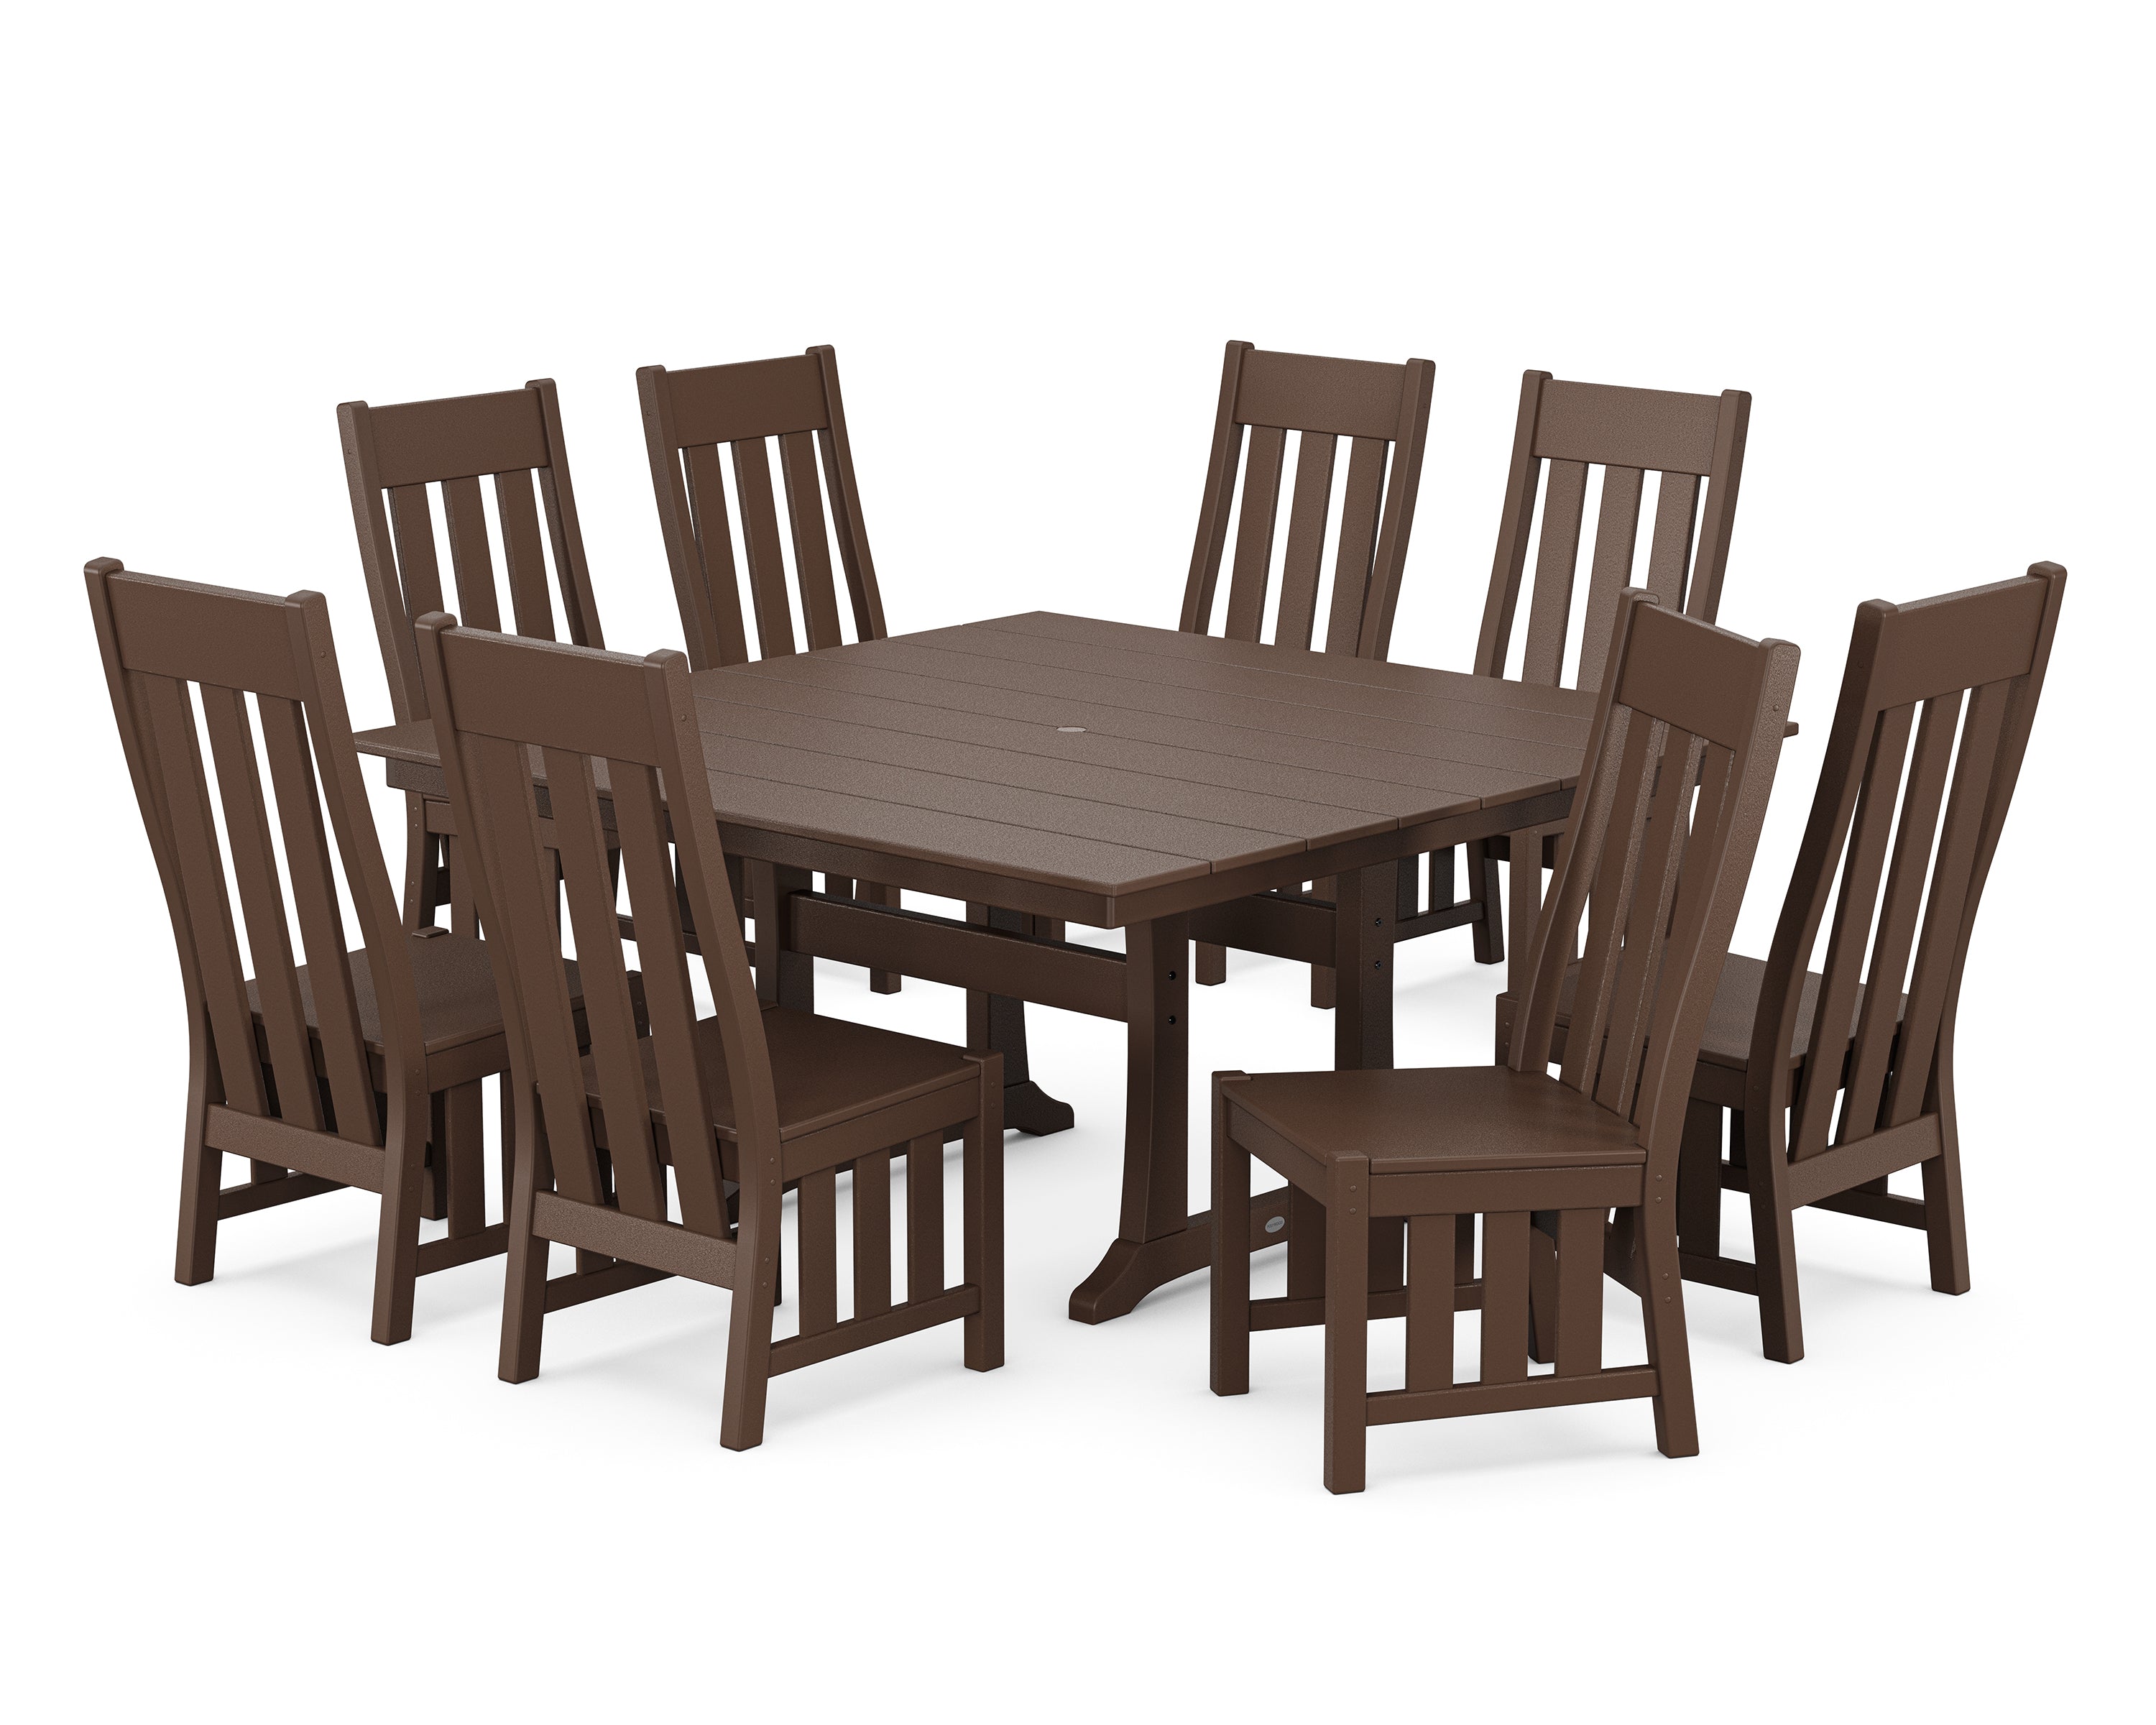 Martha Stewart by POLYWOOD® Acadia Side Chair 9-Piece Square Farmhouse Dining Set with Trestle Legs in Mahogany